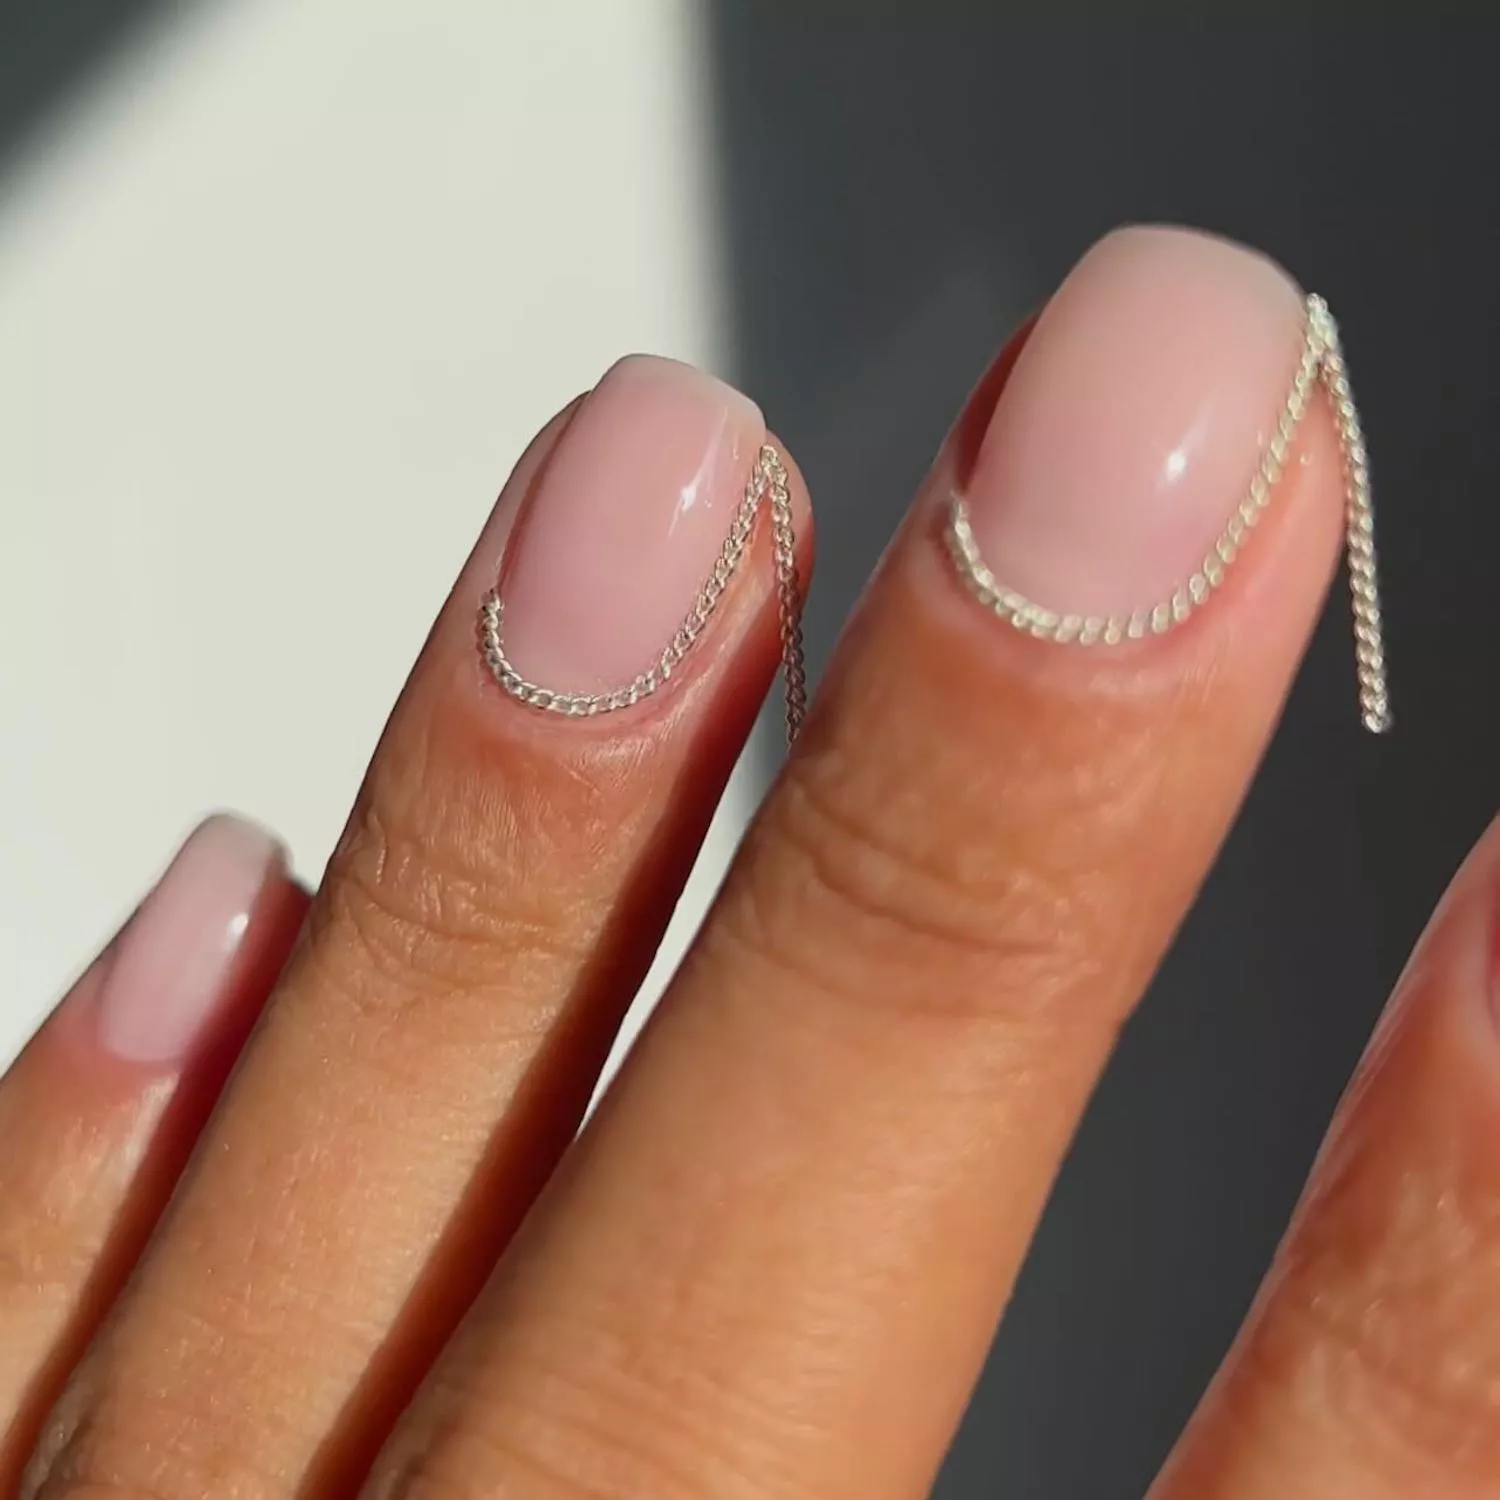 Manicure with neutral base and chain detail along cuticle with hanging end